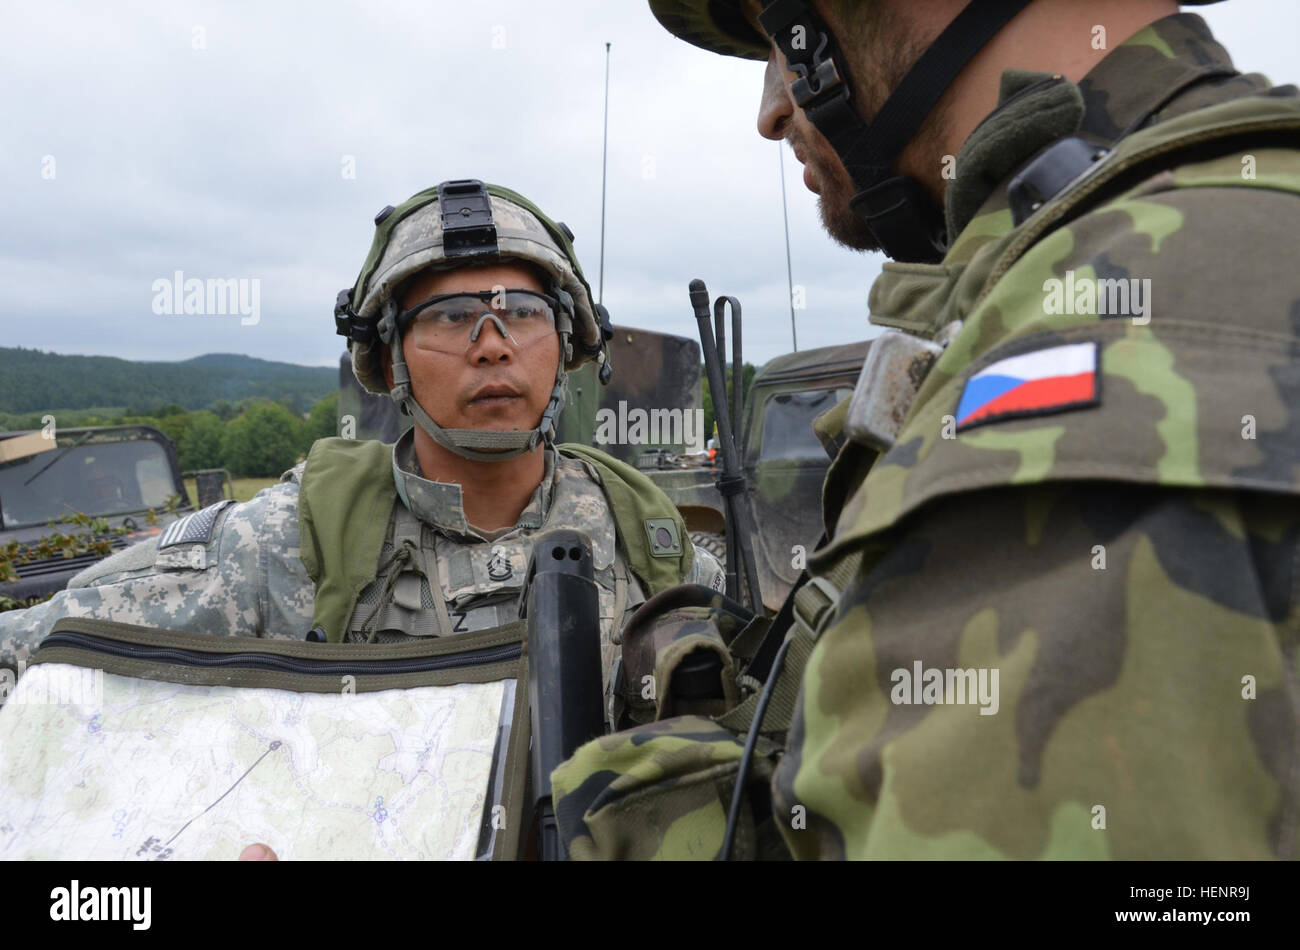 A U.S. Soldier, left, with the 500th Engineer Company, 15th Engineer Battalion and a Czech soldier with the Mechanized Infantry Brigade review a map Sept. 3, 2014, at the Joint Multinational Readiness Center in Hohenfels, Germany, during exercise Saber Junction 2014. Saber Junction is a U.S. Army Europe-led exercise designed to prepare U.S., NATO and international partner forces for unified land operations. (U.S. Army photo by Pvt. Lloyd Villanueva/Released) A U.S. Soldier, left, with the 500th Engineer Company, 15th Engineer Battalion and a Czech soldier with the Mechanized Infantry Brigade r Stock Photo